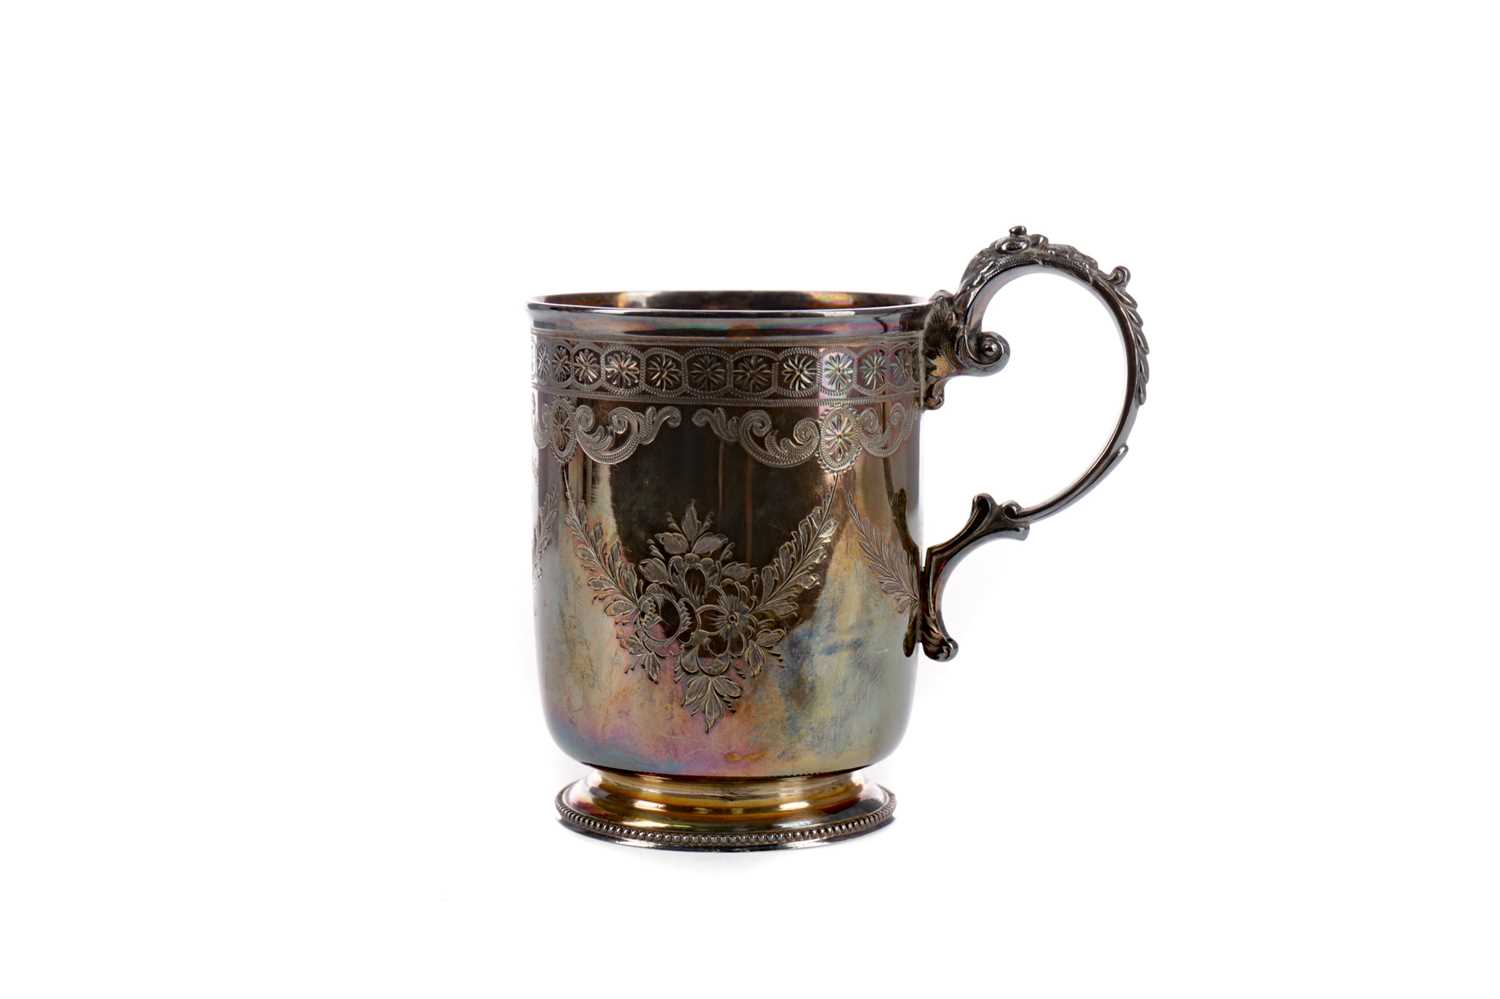 Lot 495 - A VICTORIAN SILVER CHRISTENING CUP